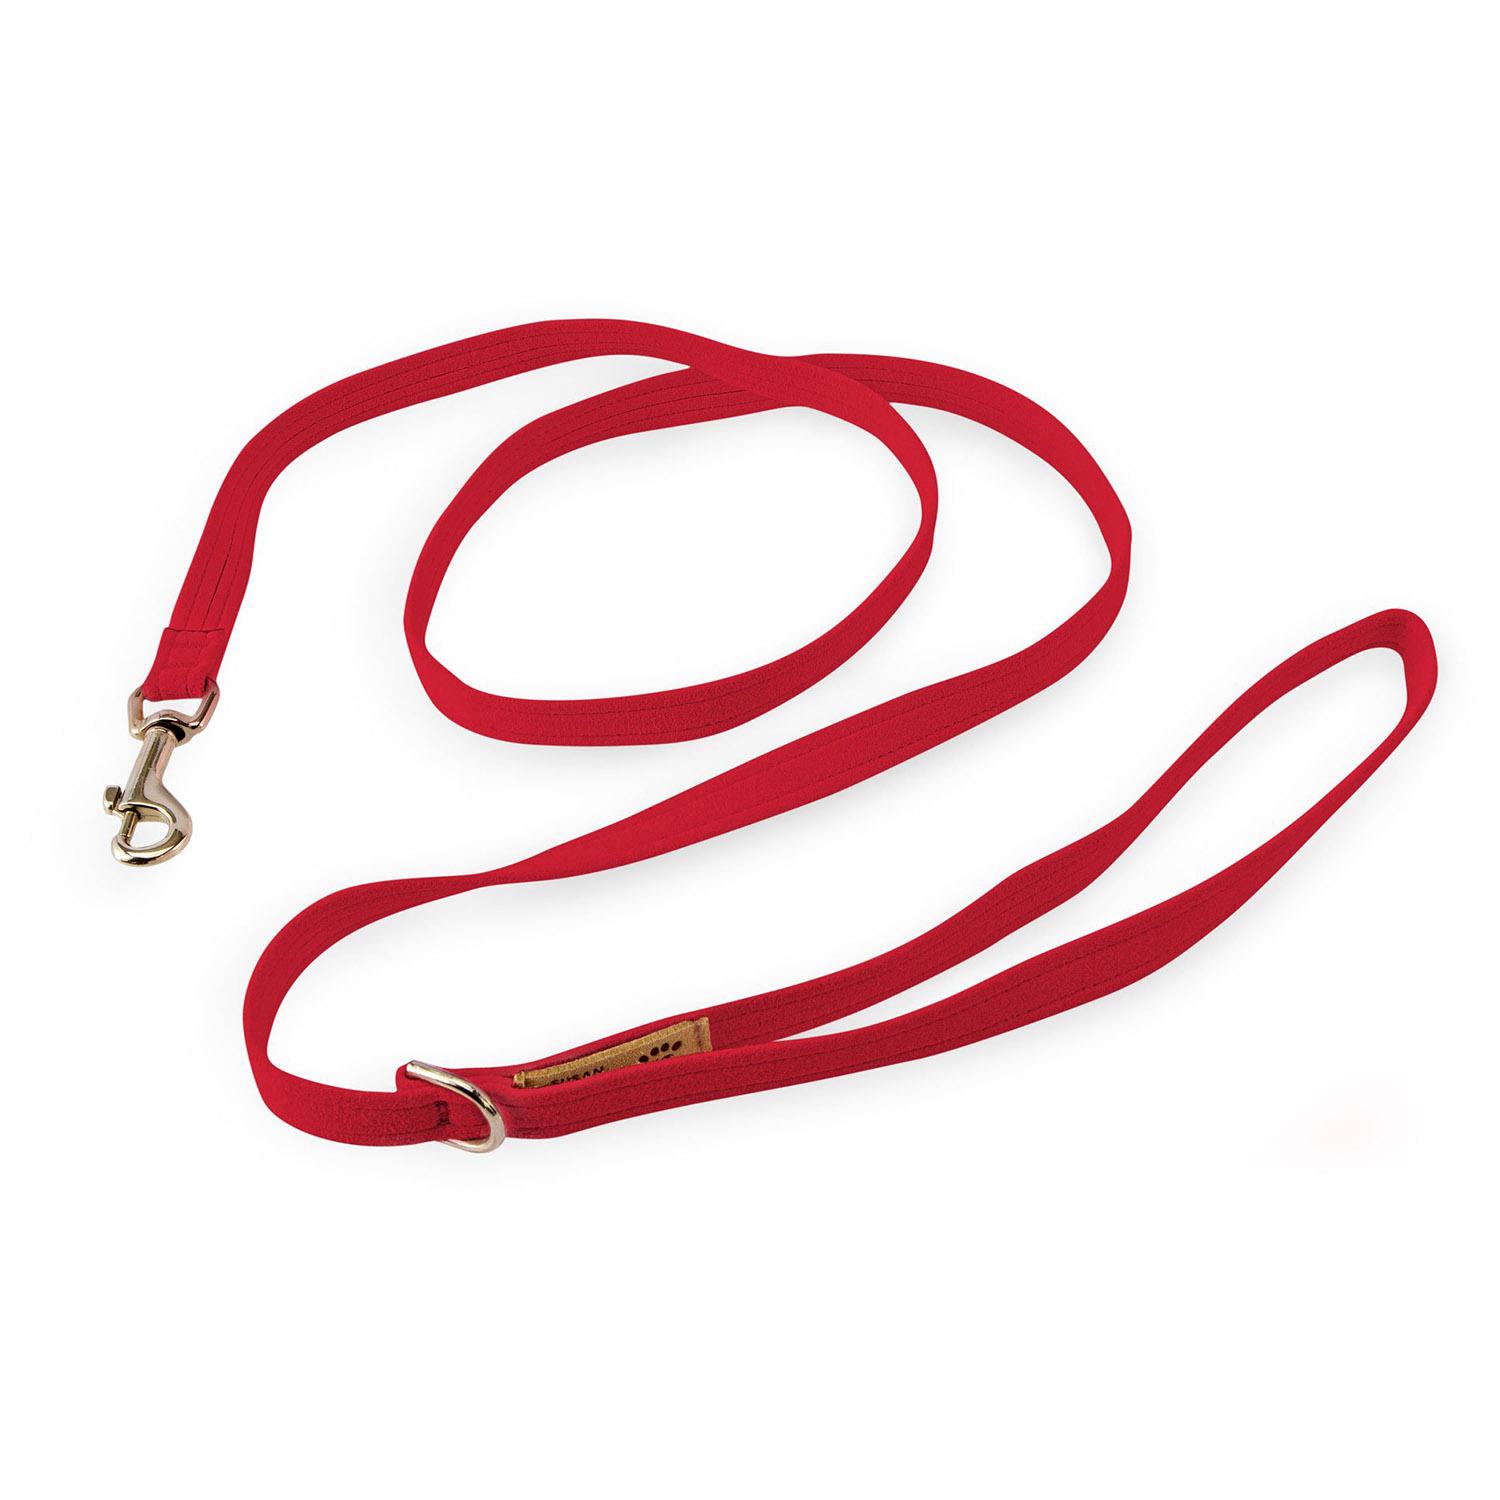 Solid Ultrasuede Dog Leash by Susan Lanci - Red